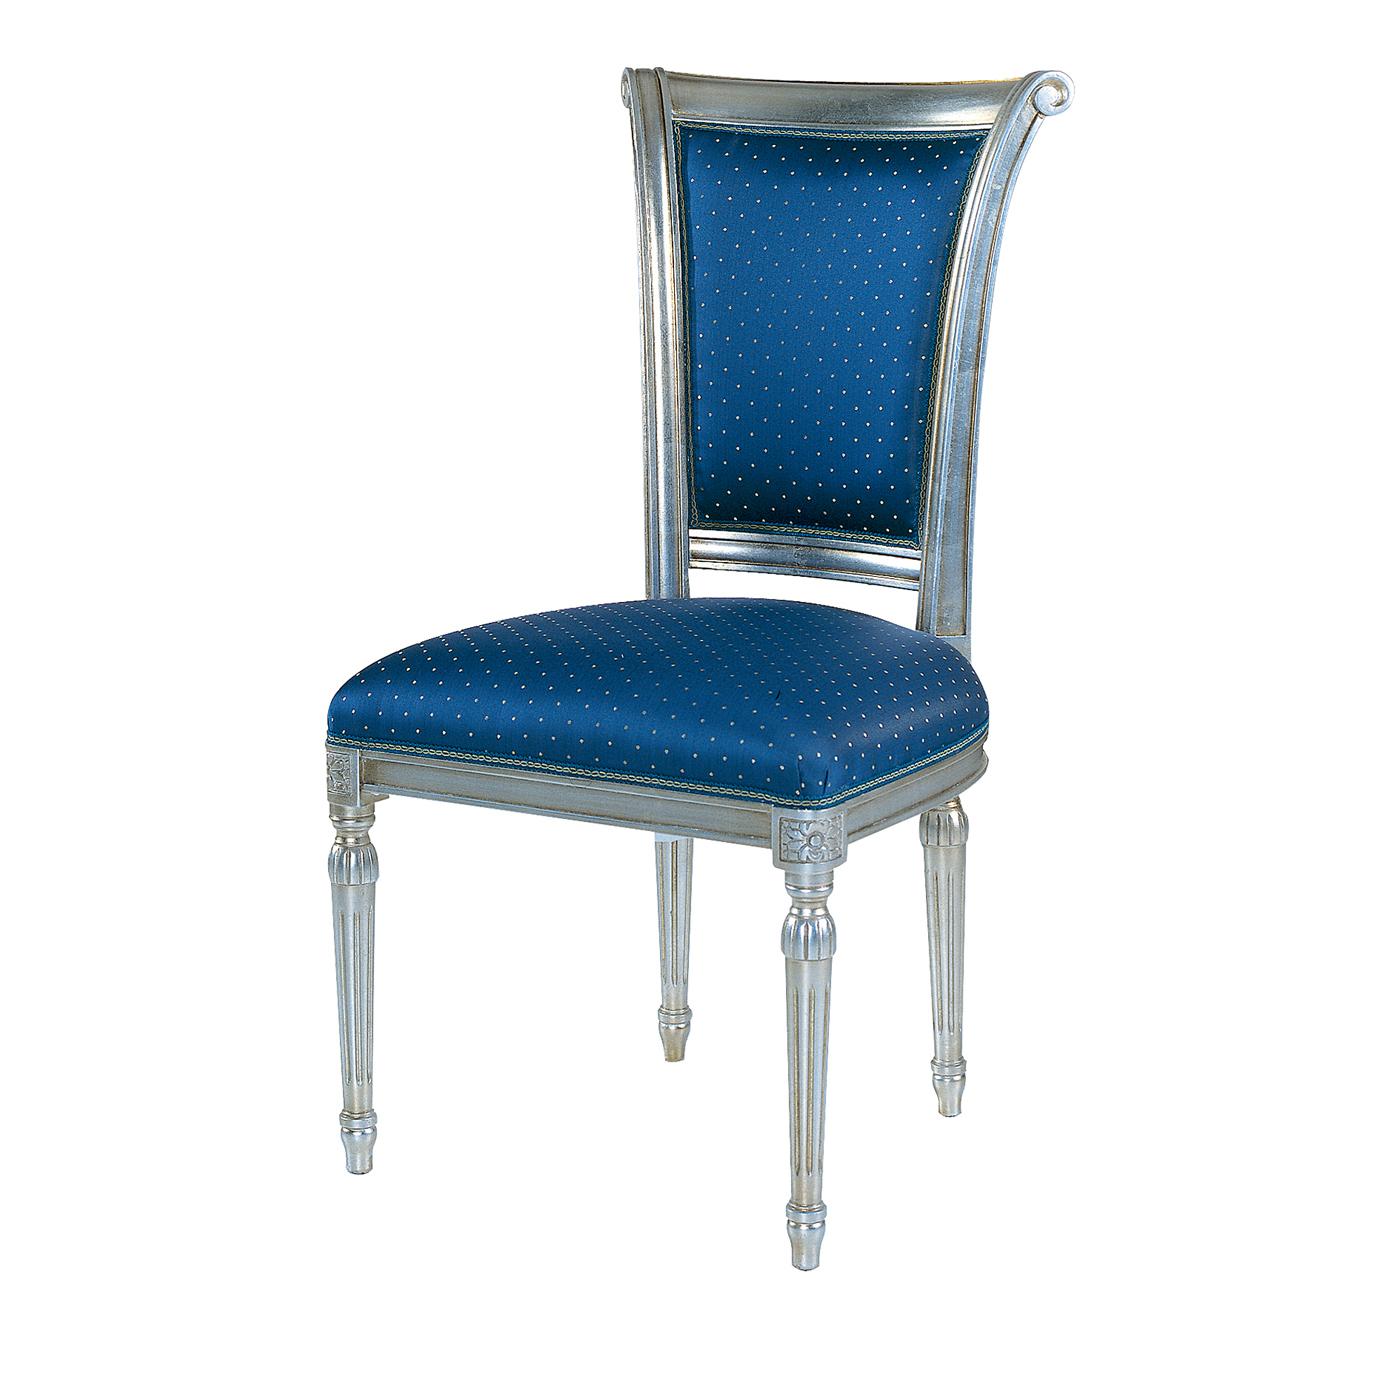 An elegant chair with a Classic and original design. This chair, part of the Contemporary collection, has a wooden frame with silver finish, which perfectly combines with the upholstery of the seat and back. in a small polka dots blue material . A